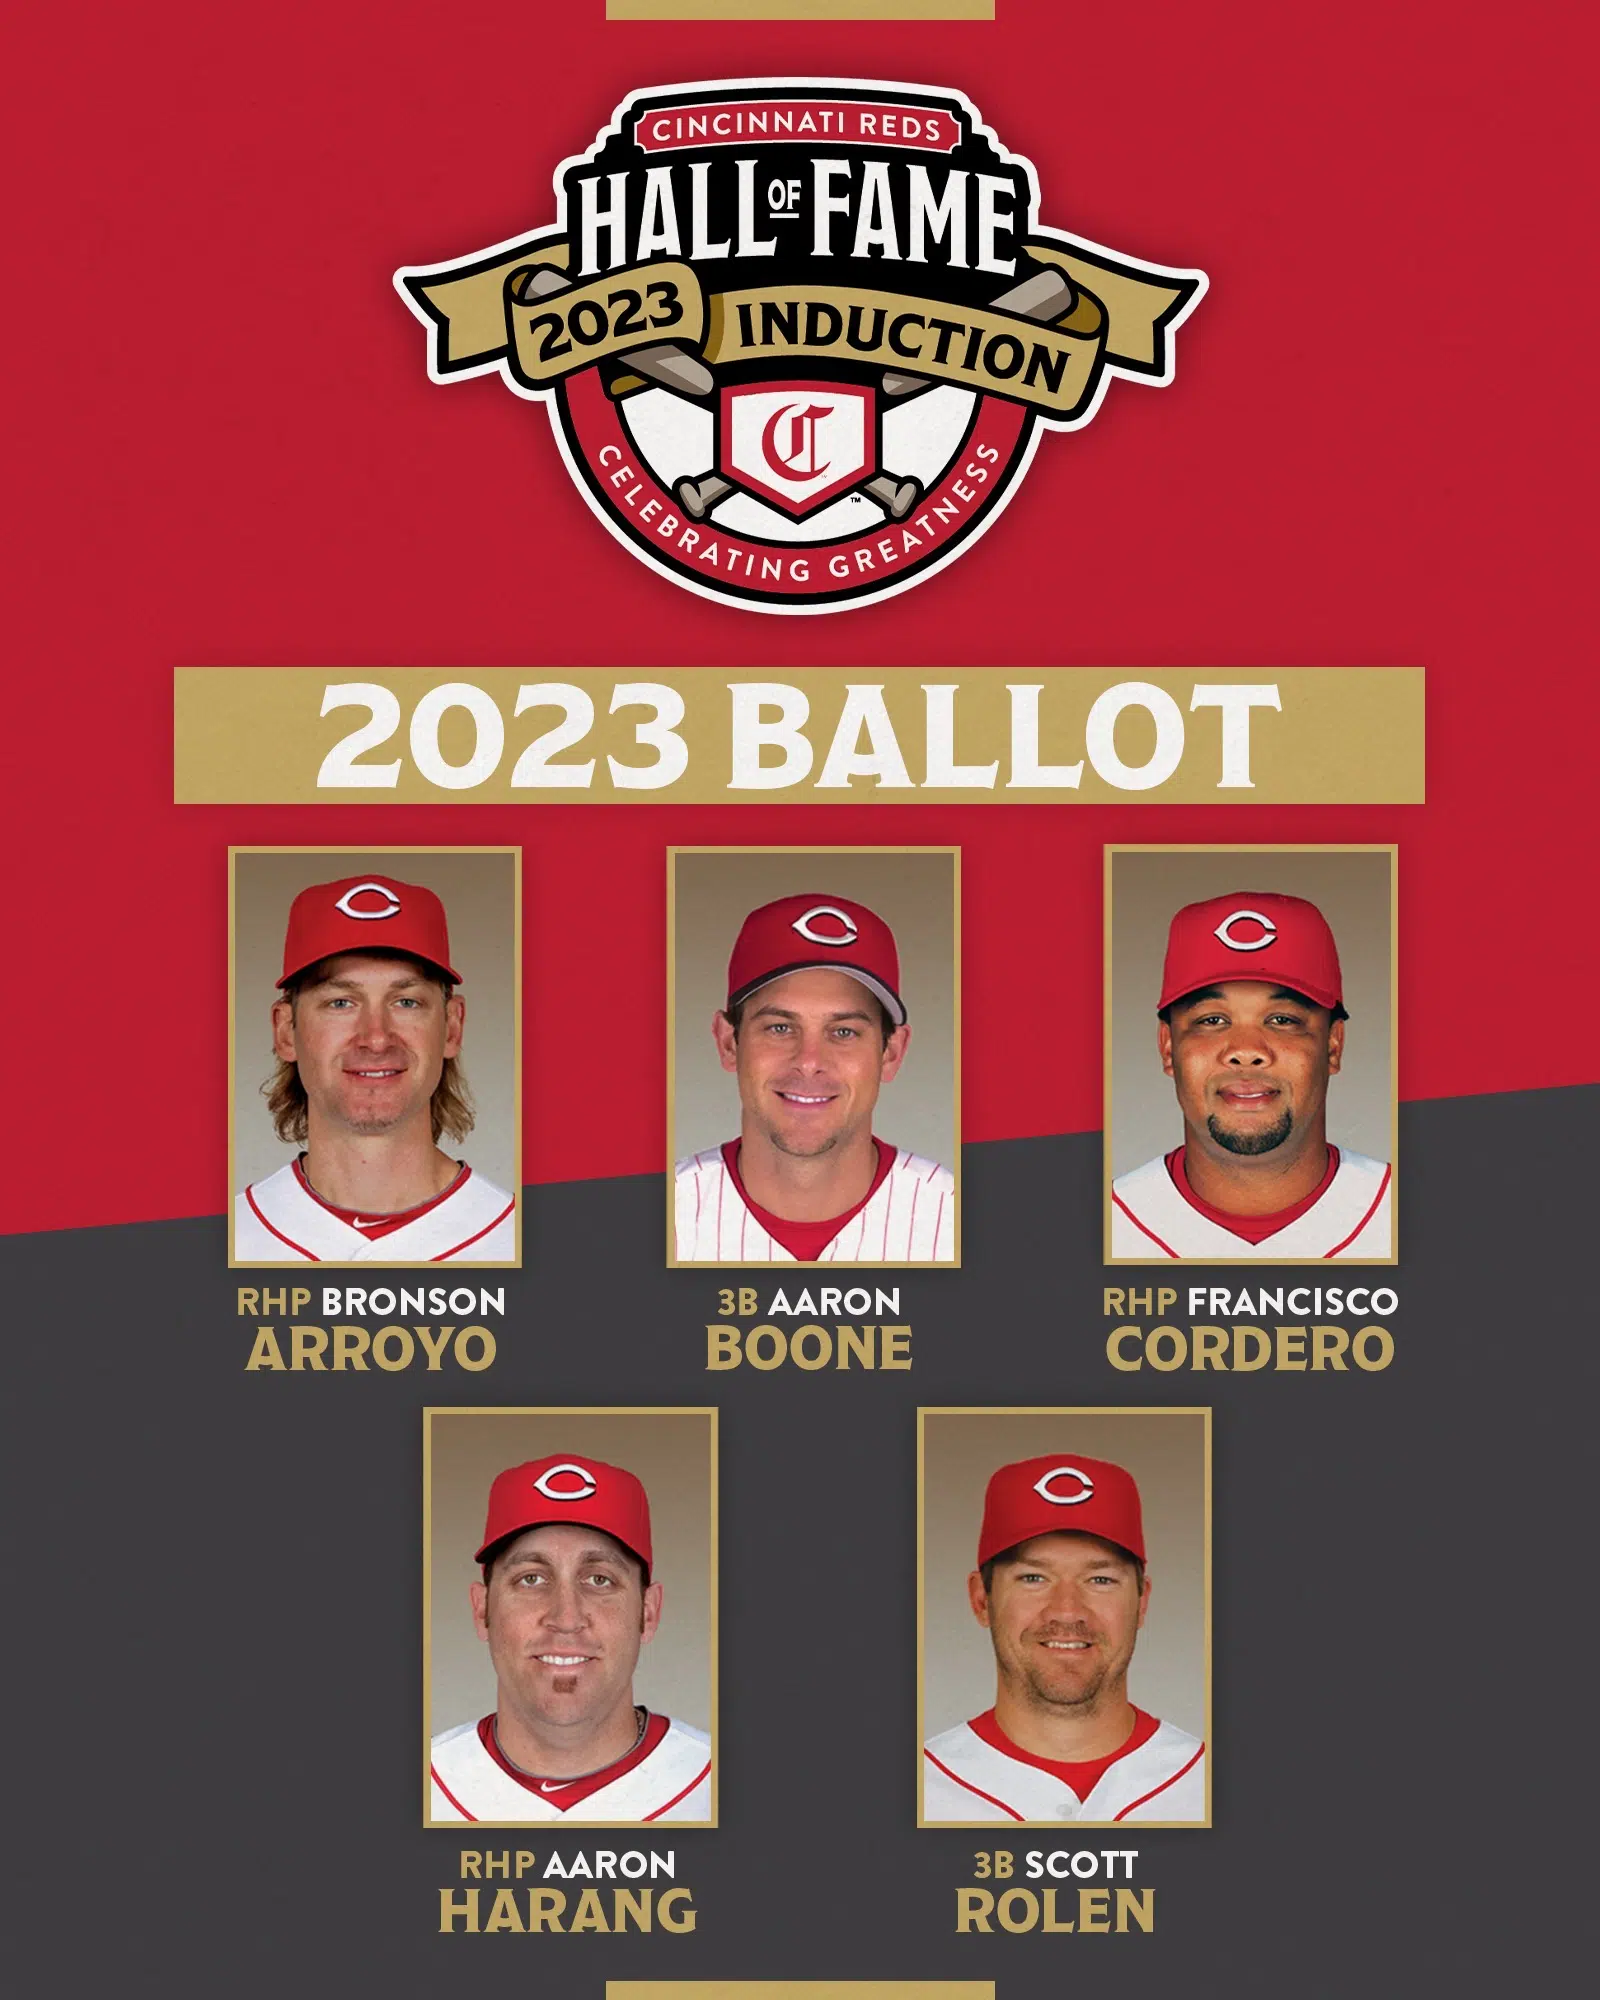 Five candidates announced for the 2023 Reds Hall of Fame Modern Player